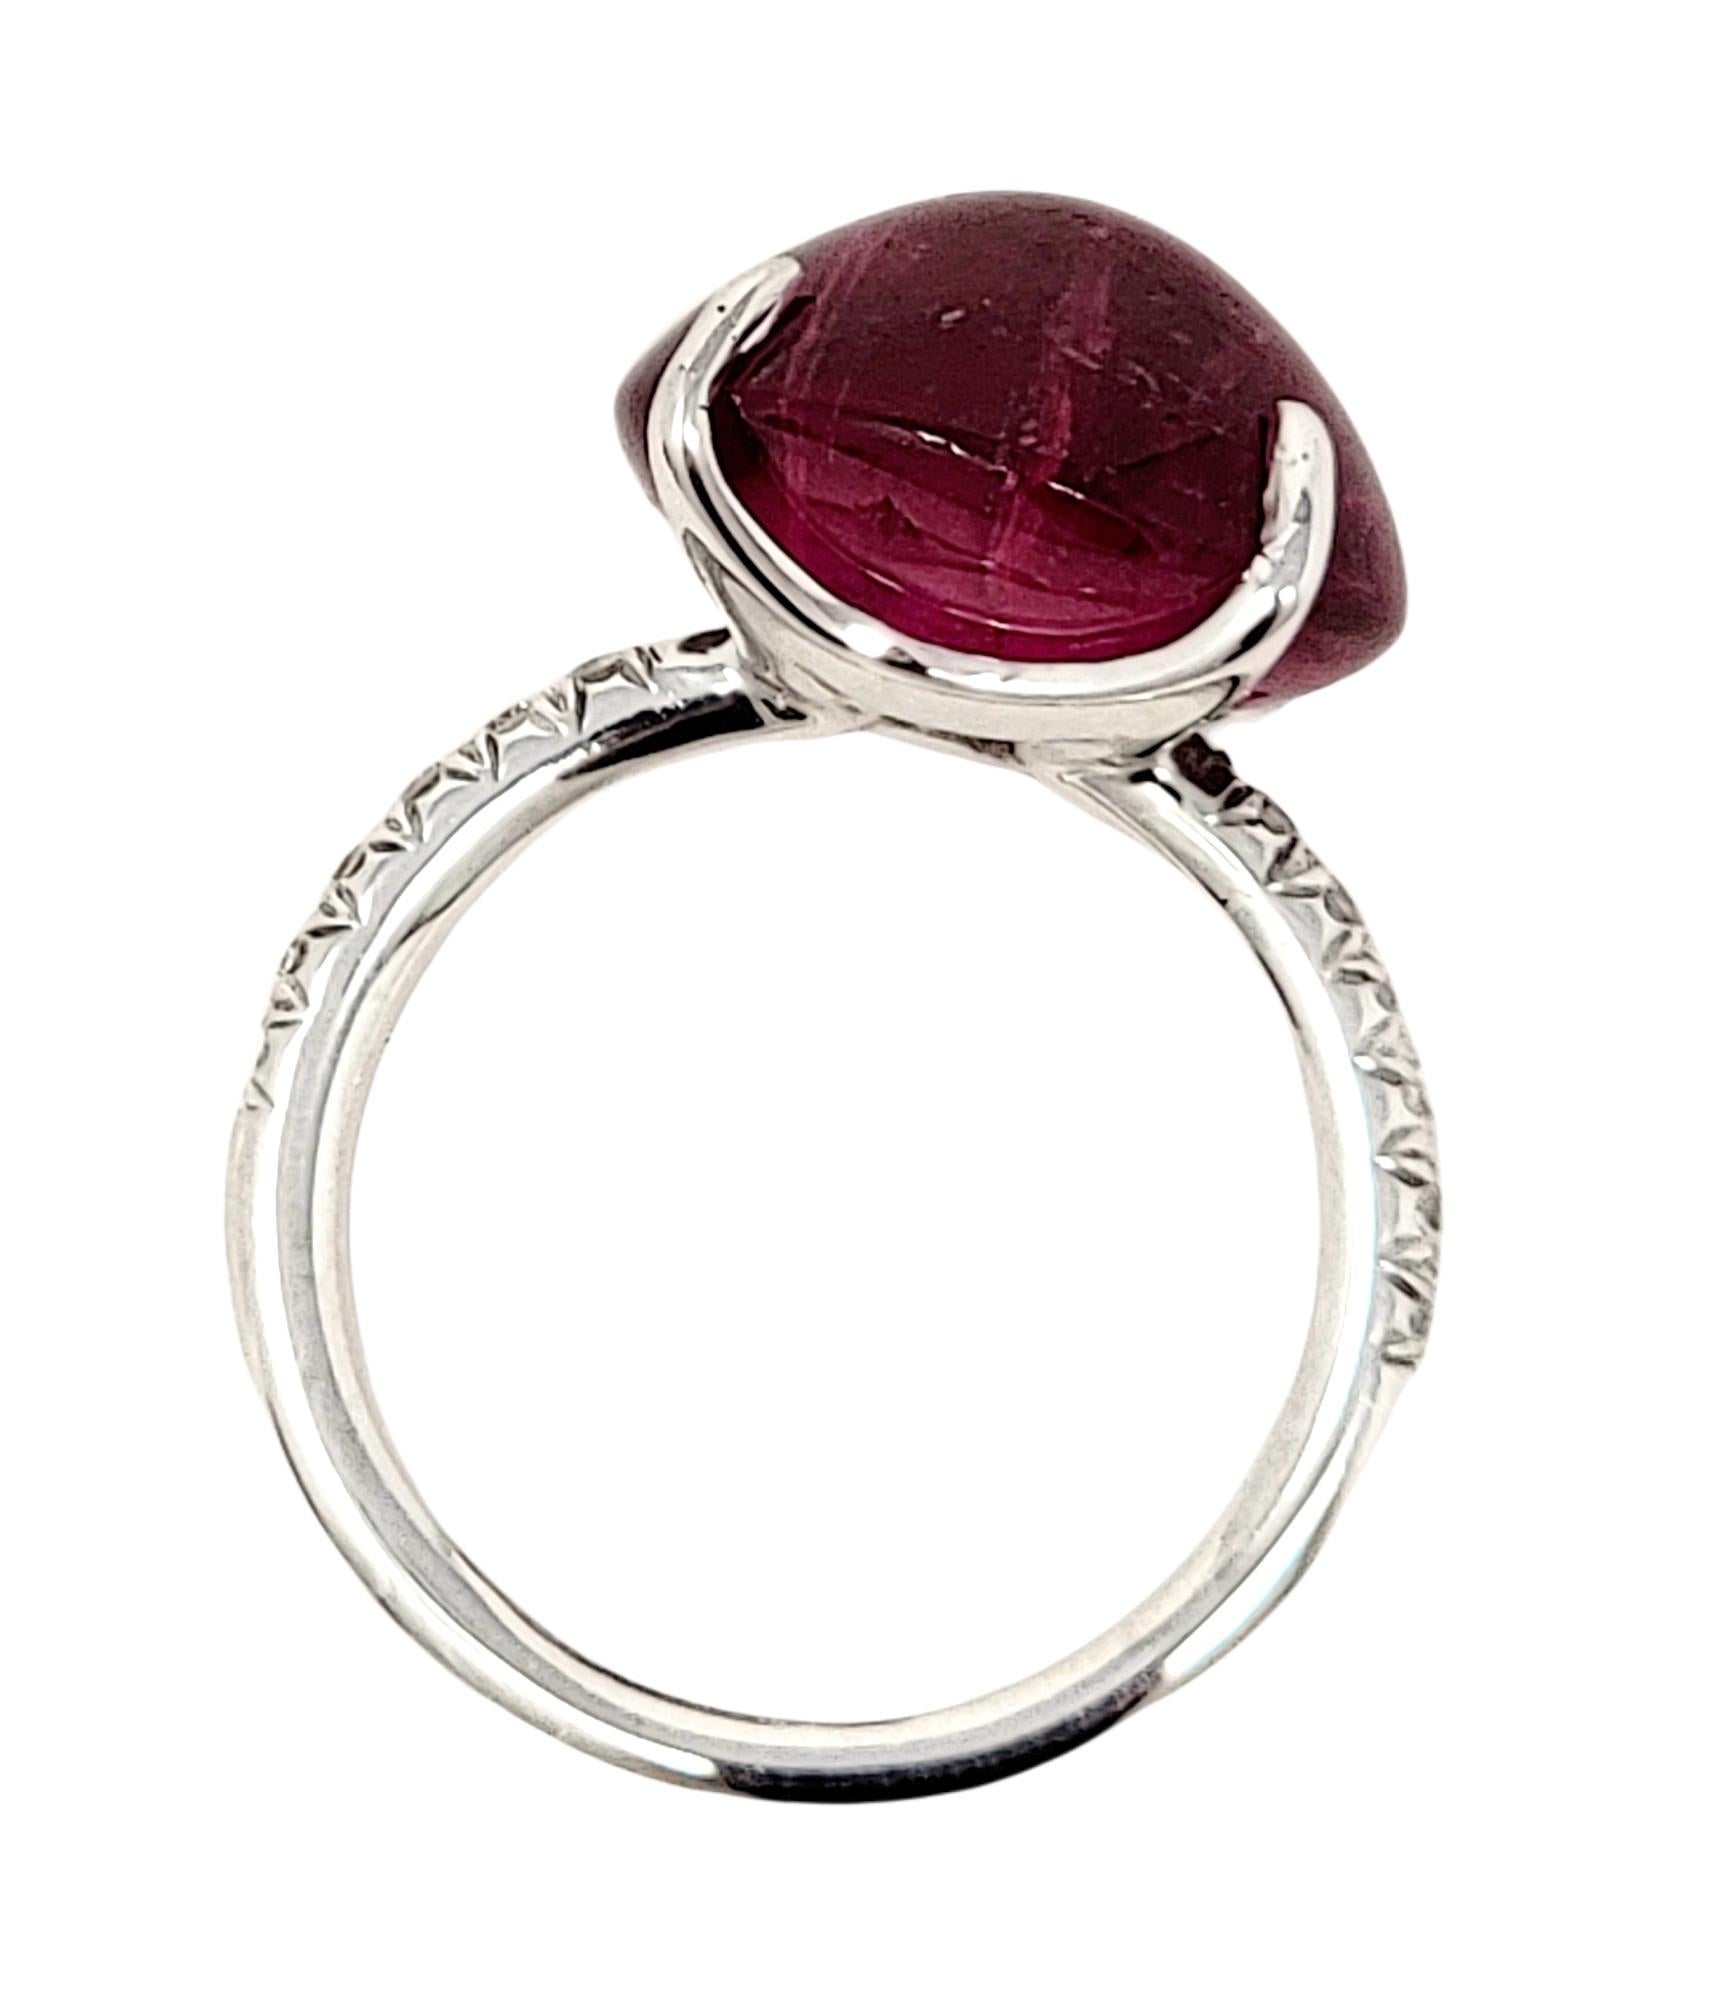 Cabochon Rubelite Solitaire 18 Karat White Gold Cocktail Ring with Pave Diamond For Sale 1